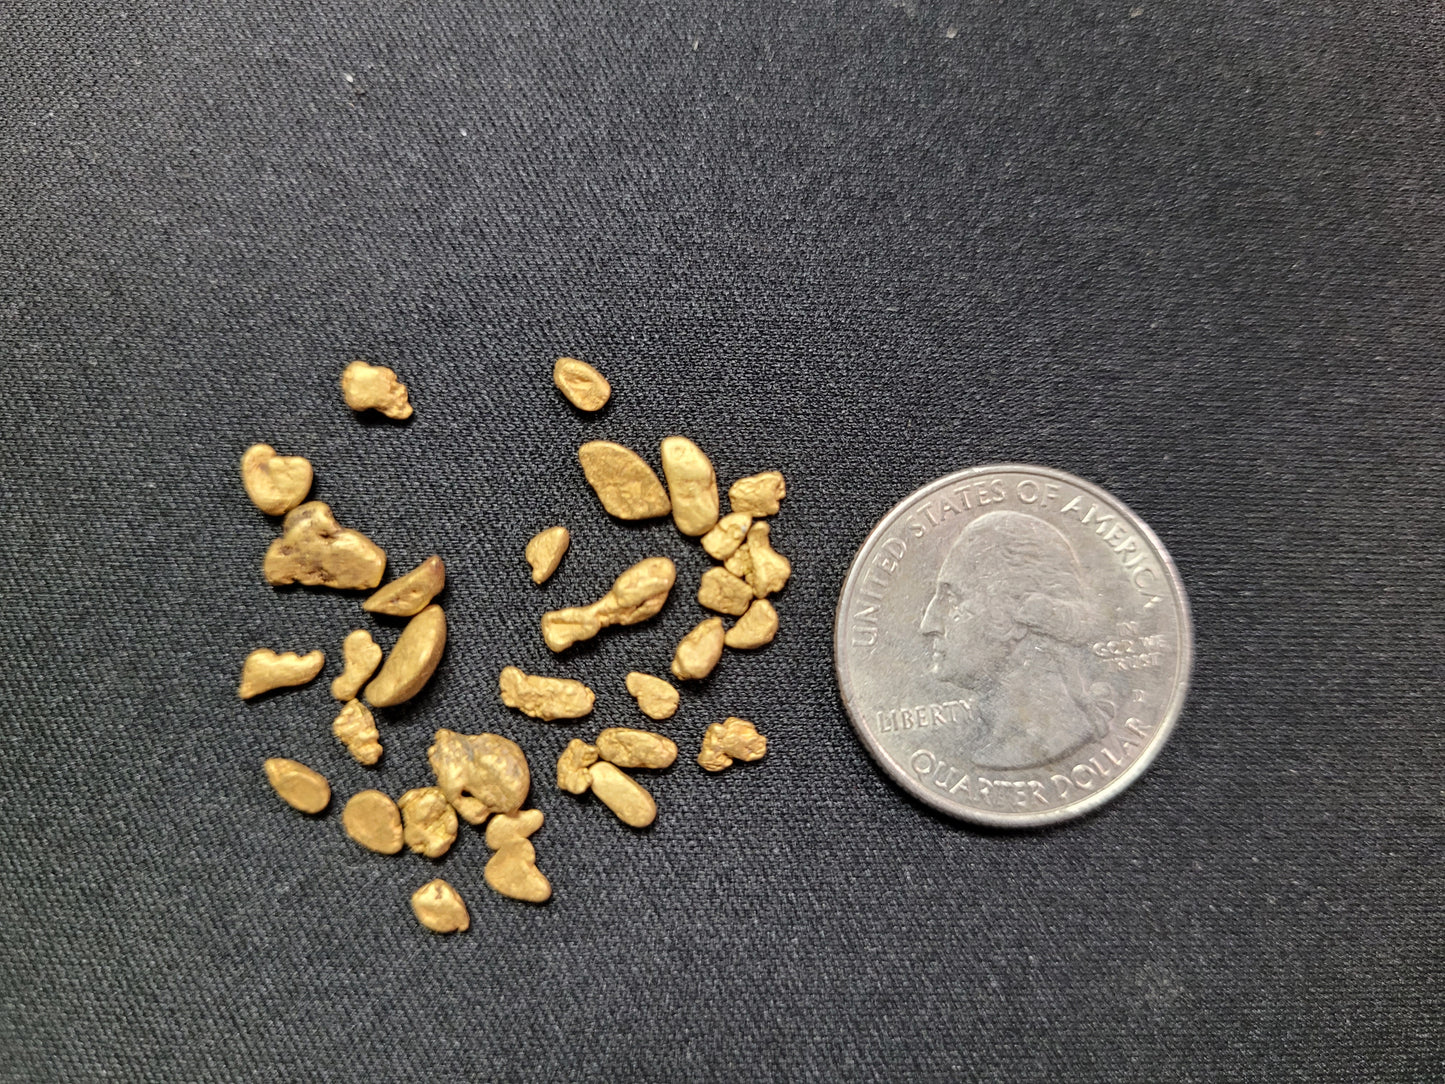 1 Gram of  Coarse Placer Gold-